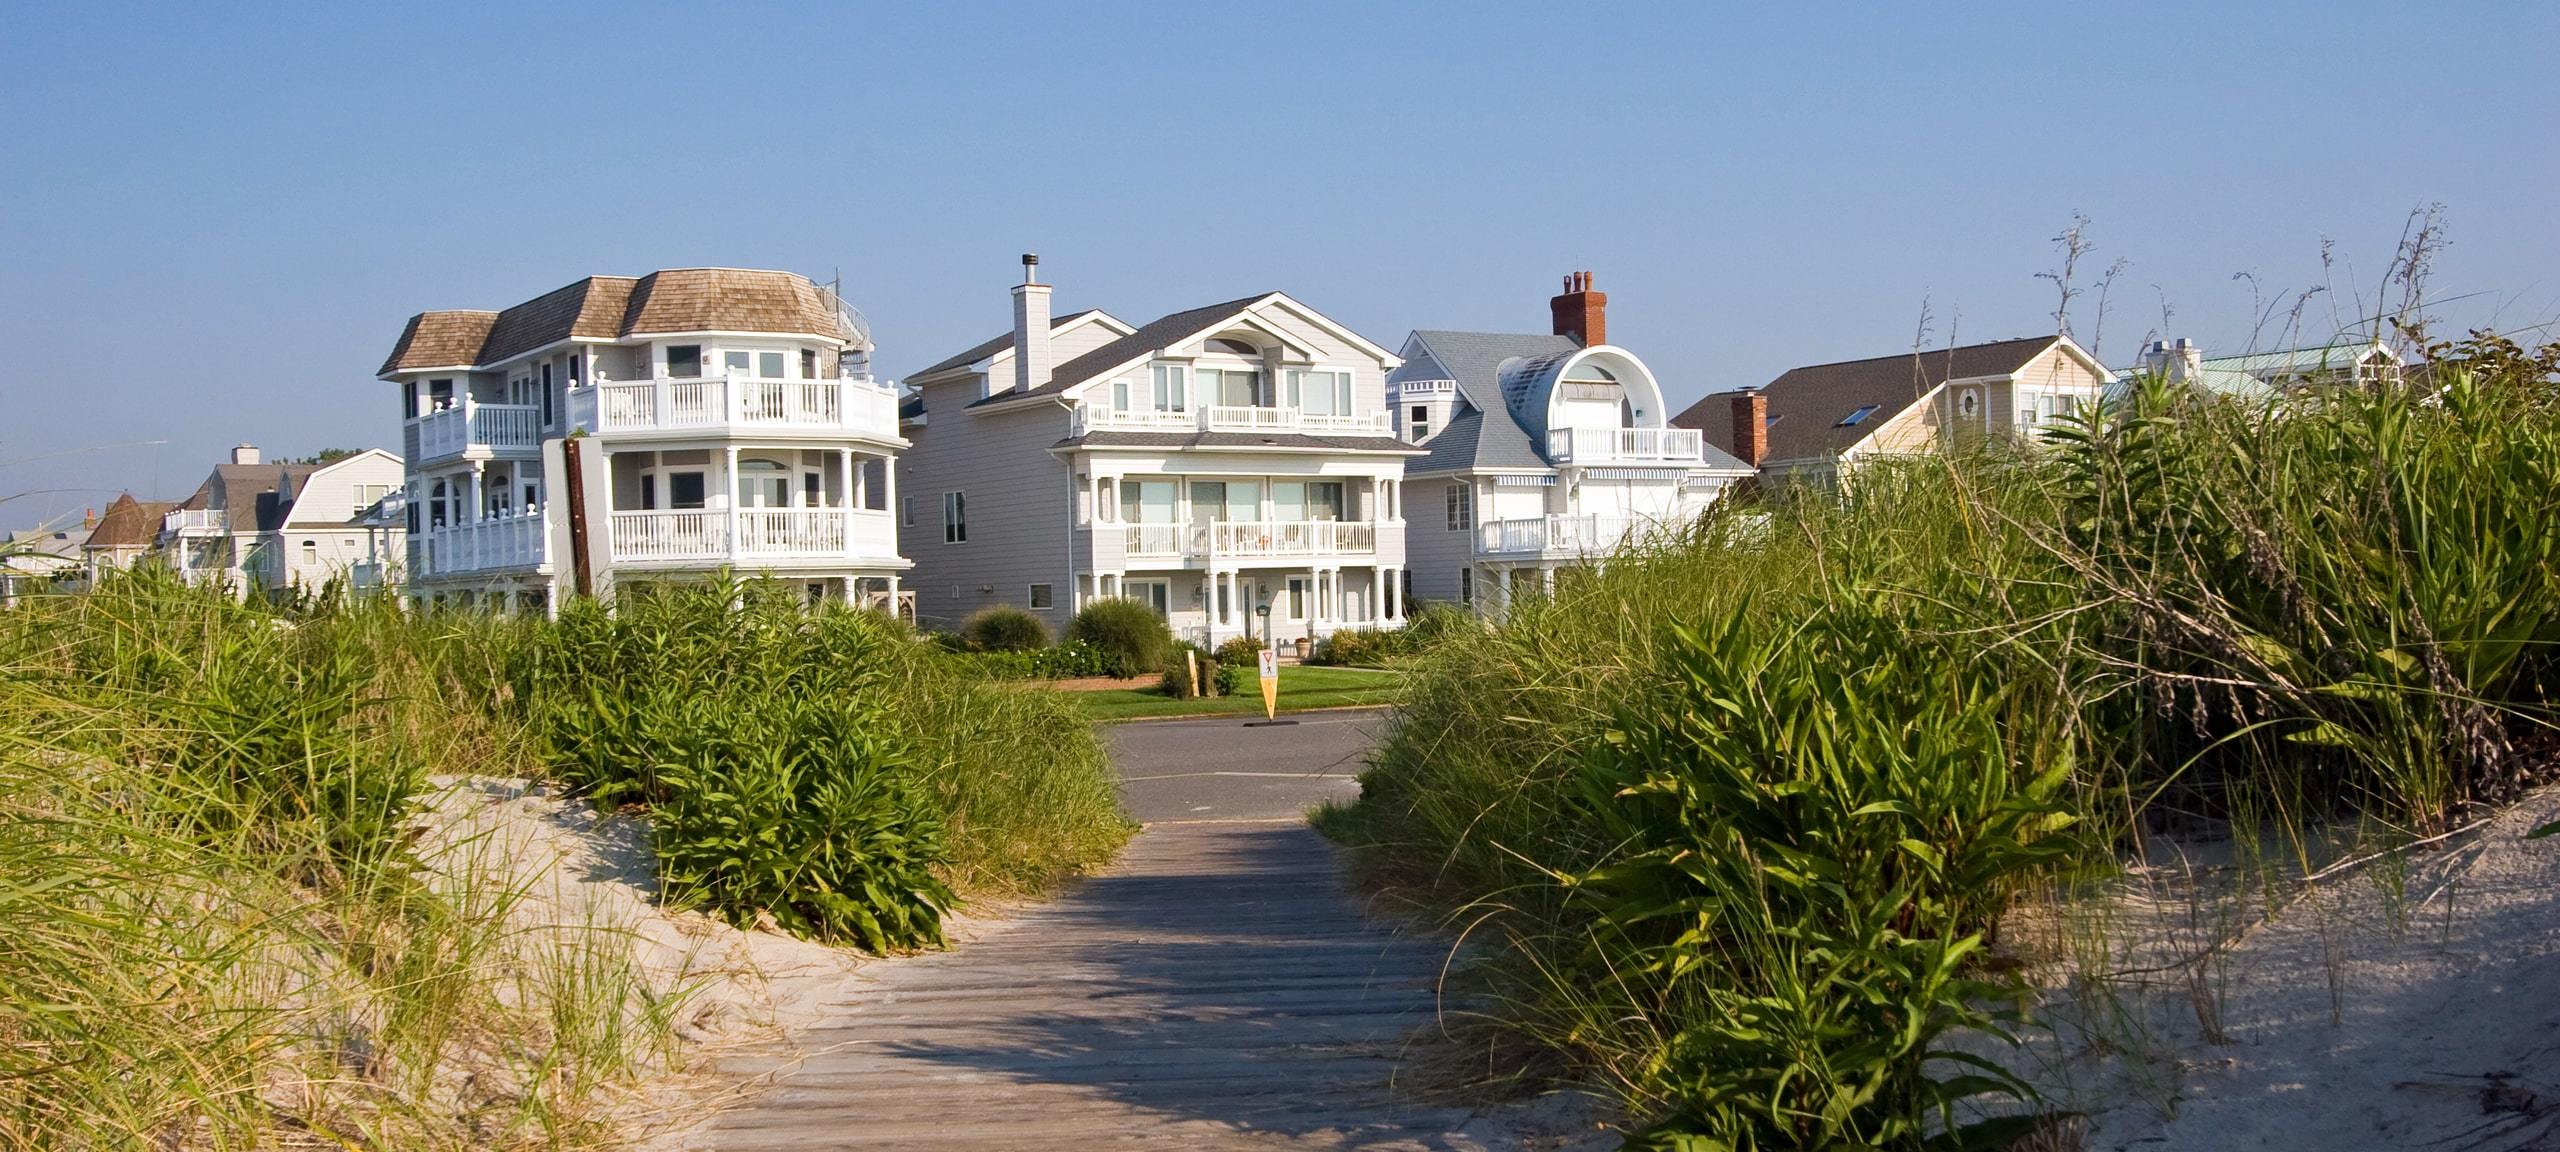 Boardwalk leading up to luxury homes in the Jersey Shore, NJ